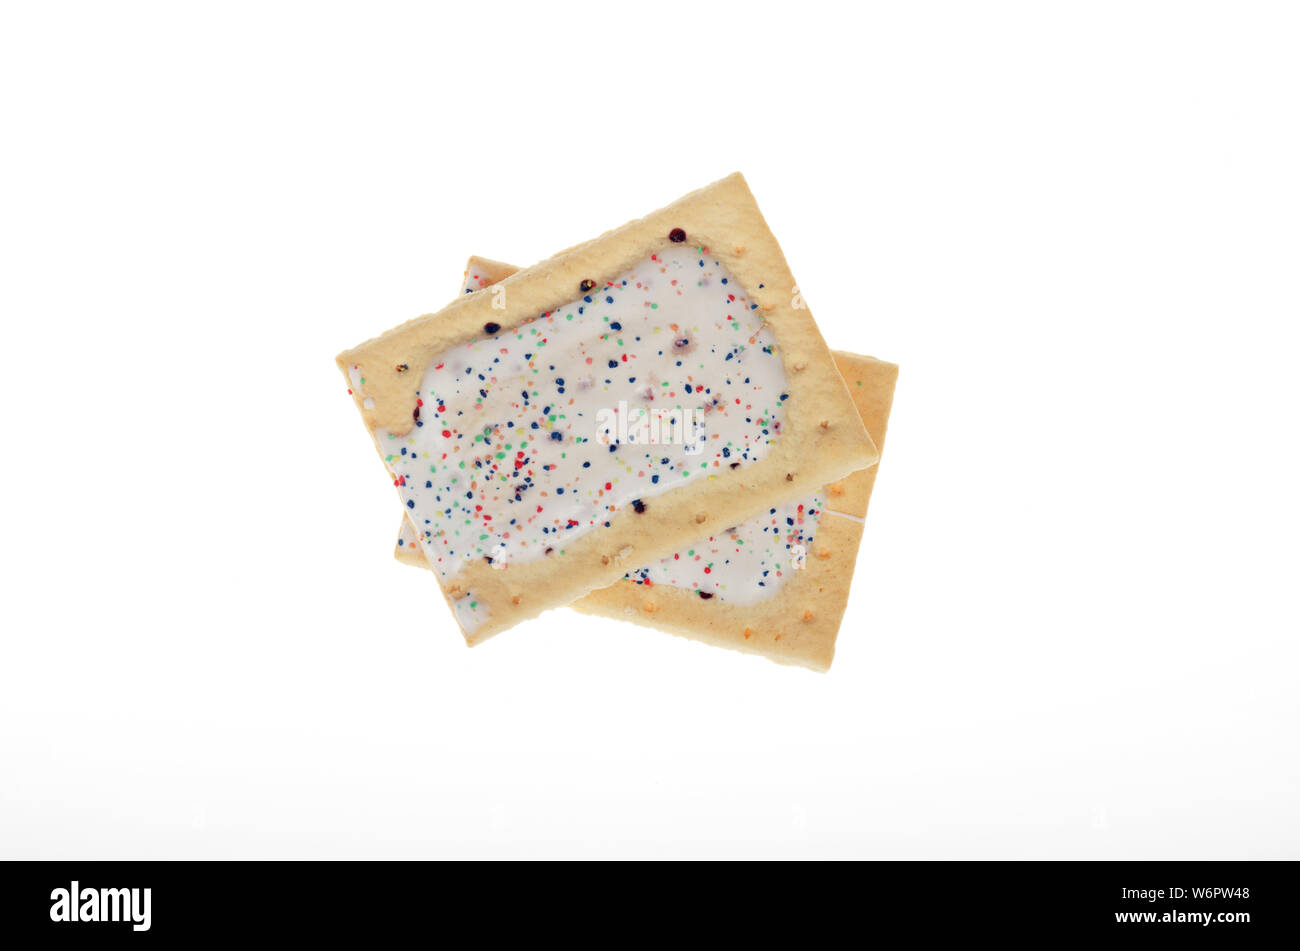 Kellogg's Frosted blueberry Pop-Tarts grille-pain pâtisseries Banque D'Images